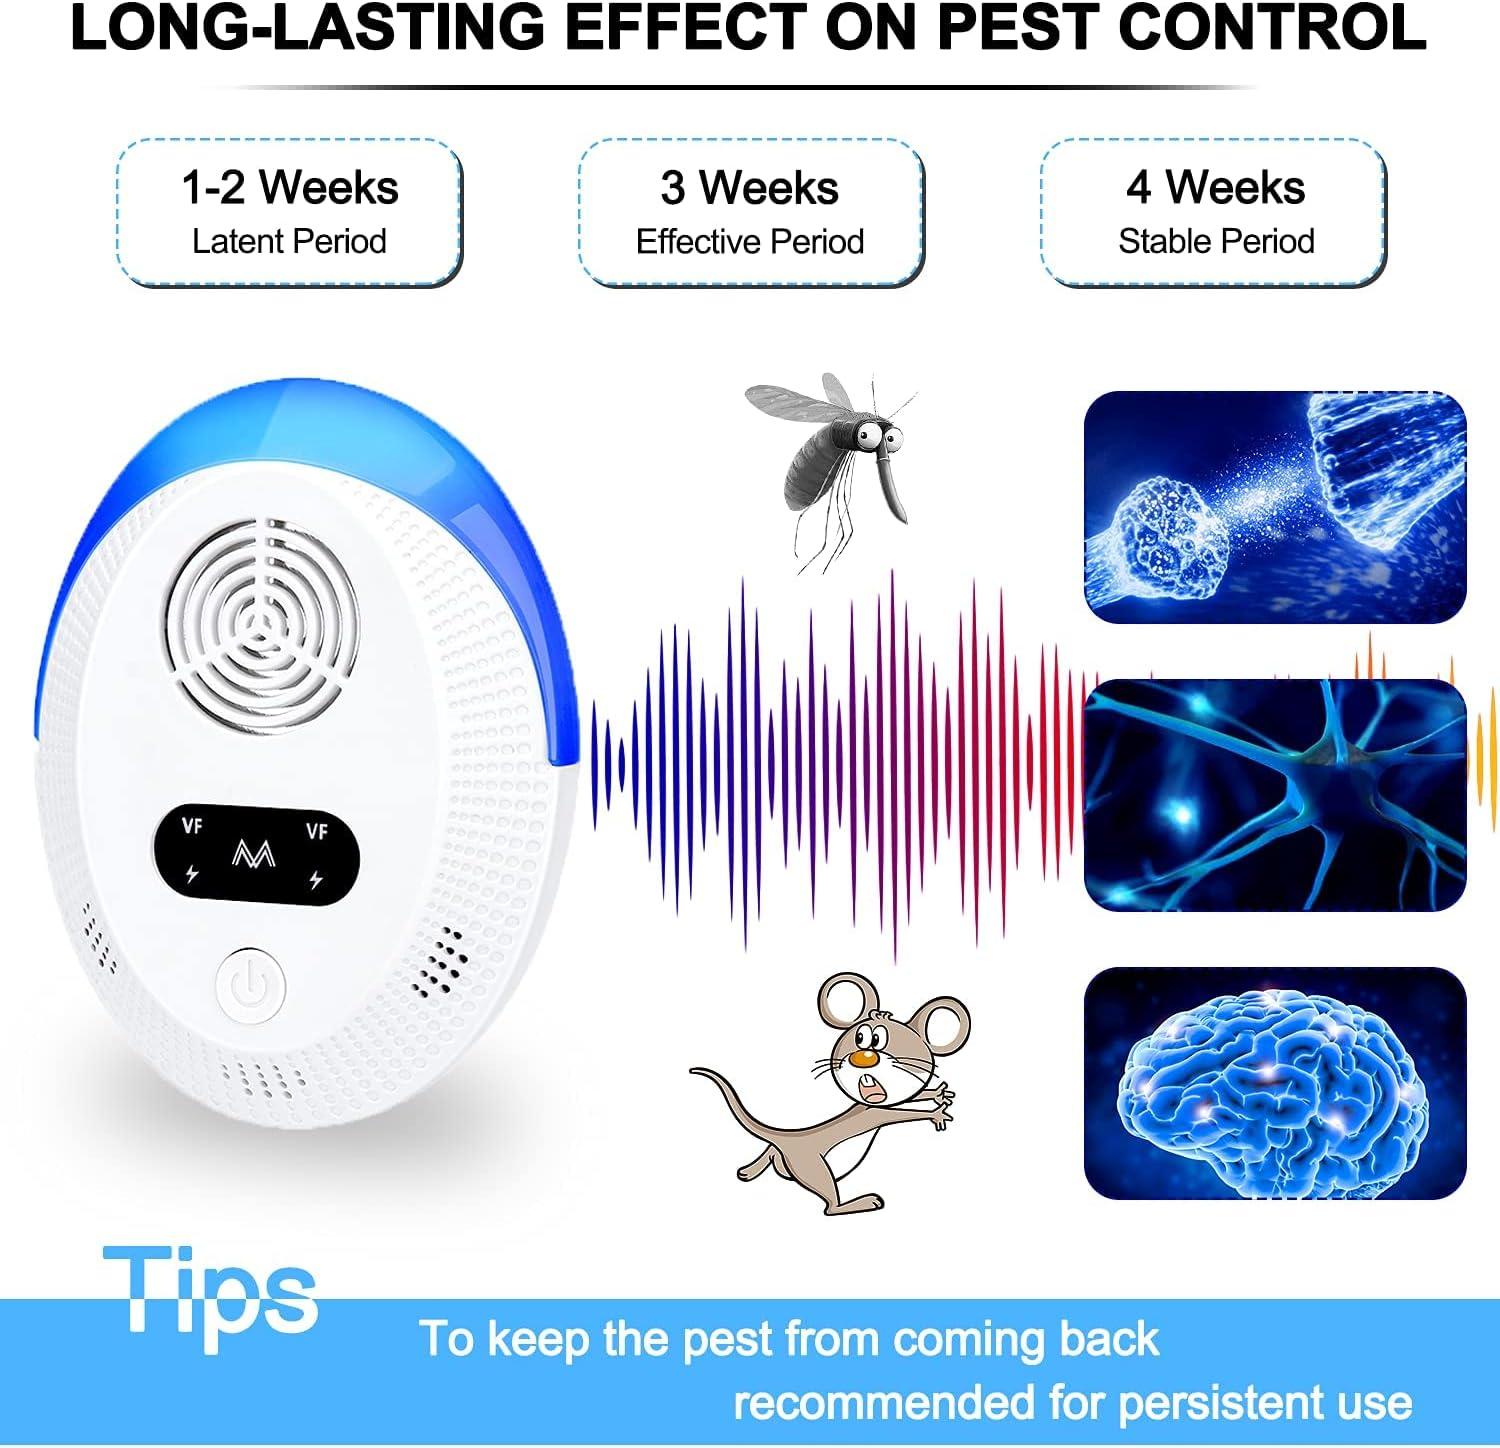 Pest Away Rodent & Insect Killer with UK 3-Pin Plug